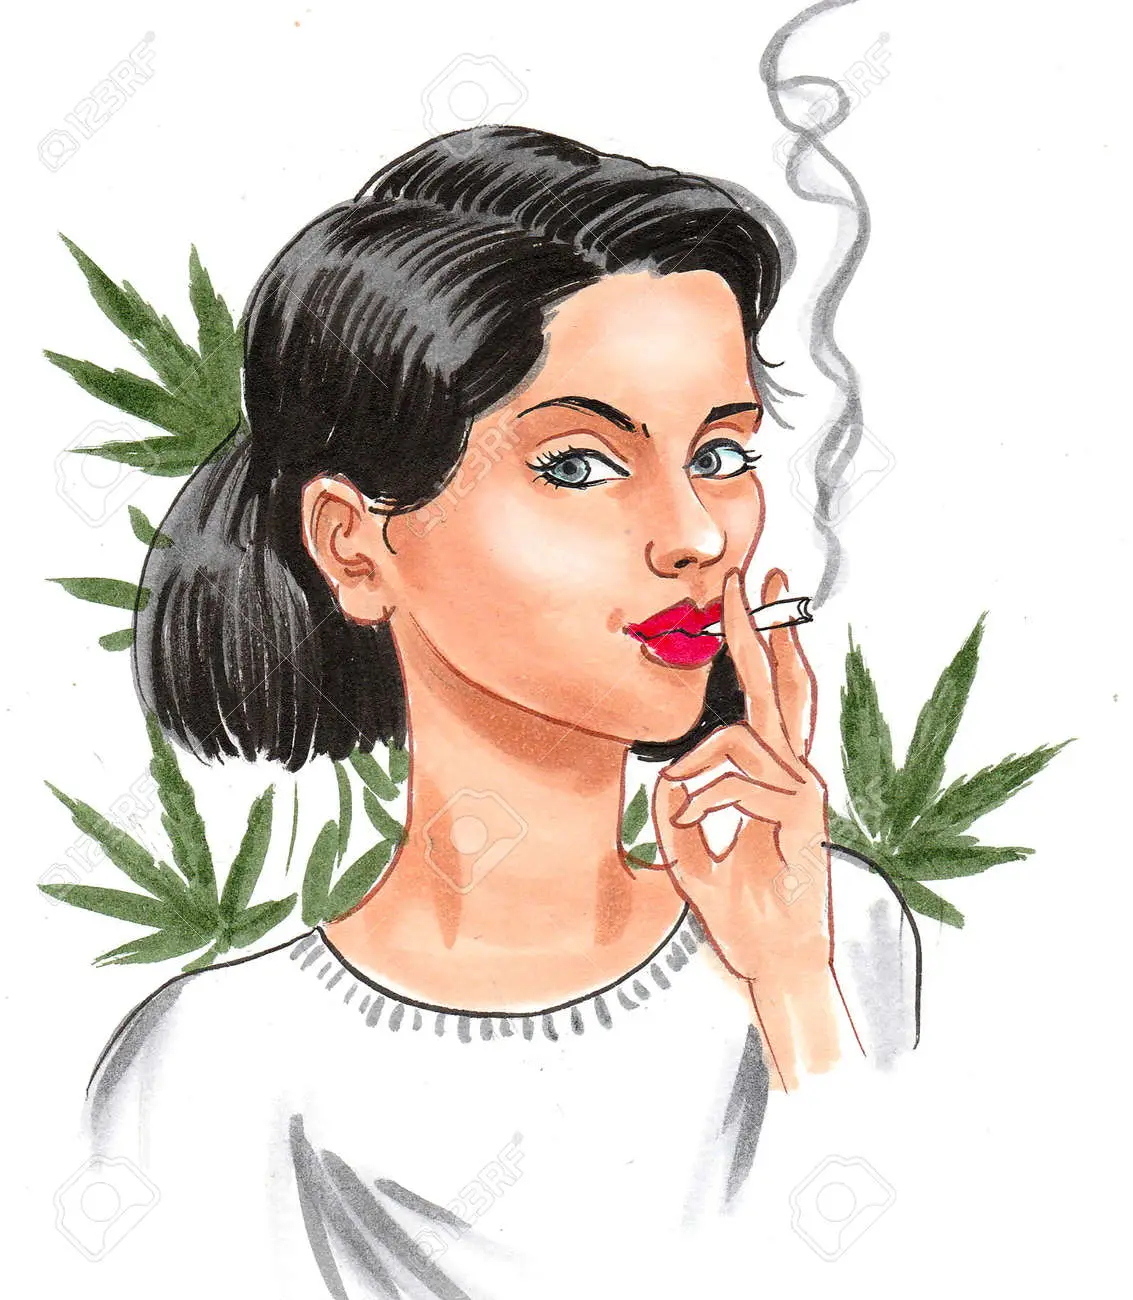 Pretty girl smoking marijuana joint ink and watercolor illustration stock photo picture and royalty free image image